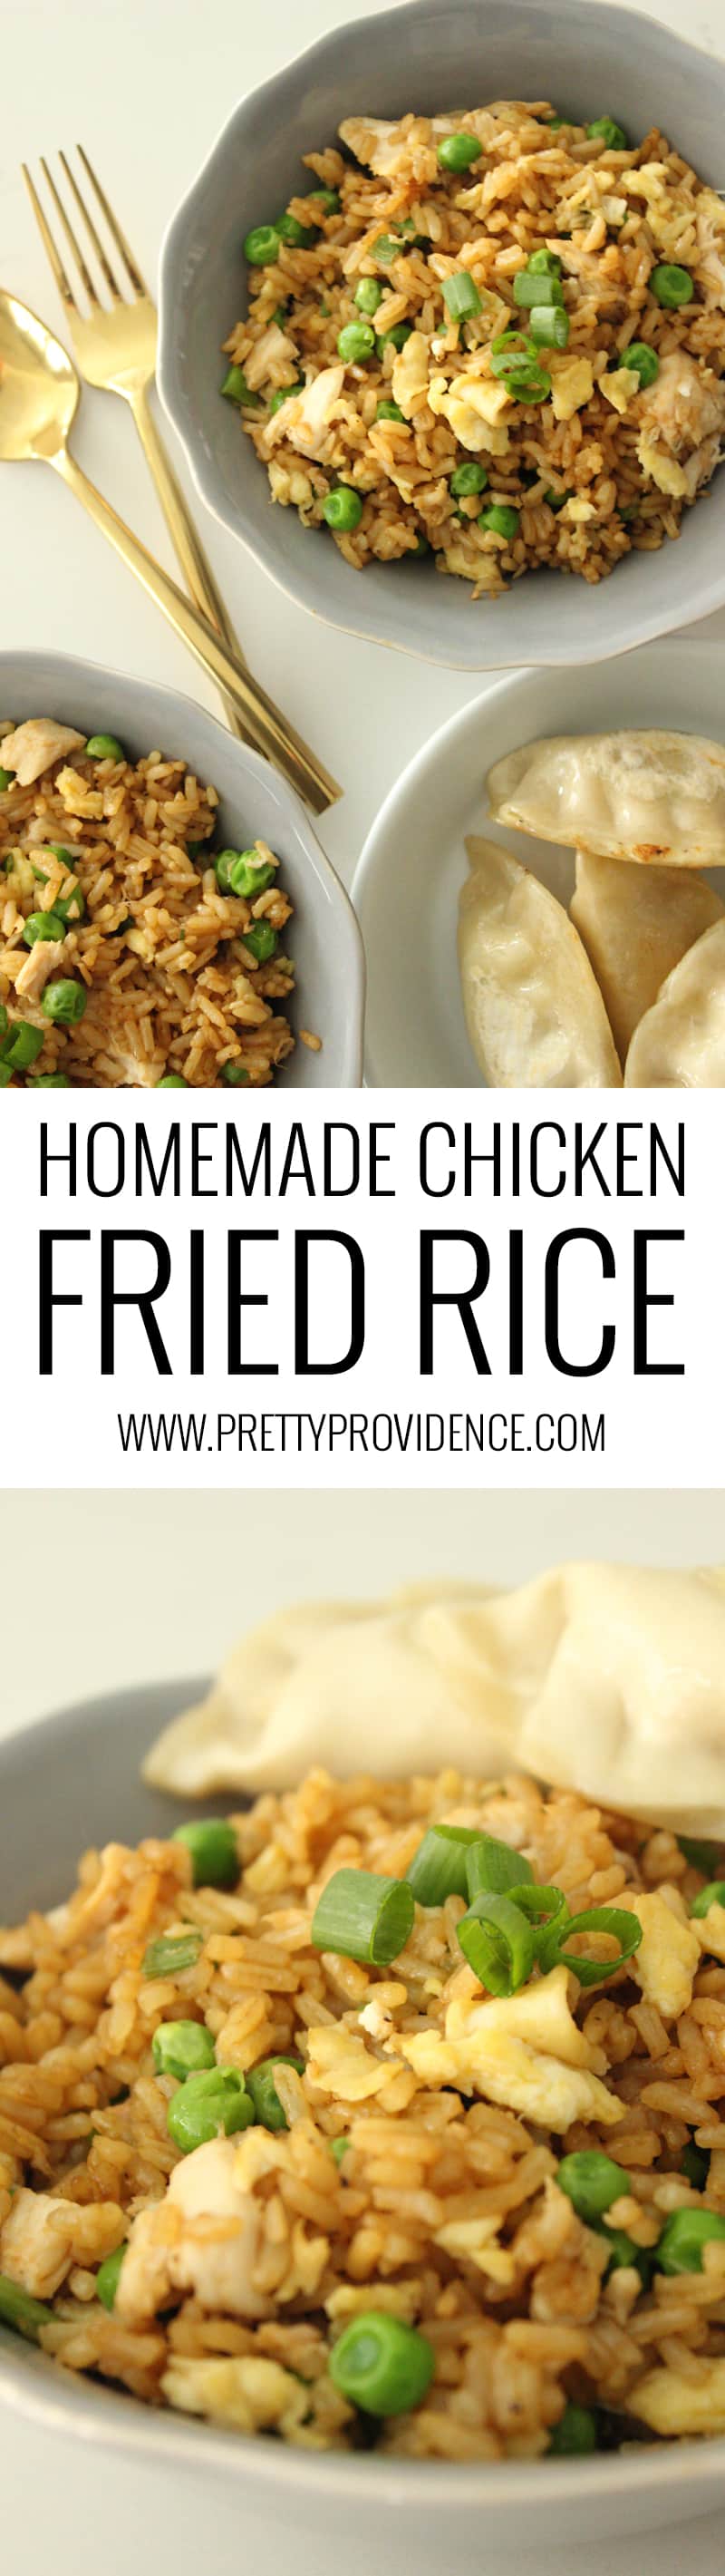 Wow! I can't believe how easy this homemade chicken fried rice is to make! So delicious too! Definitely adding this one into our rotation! 